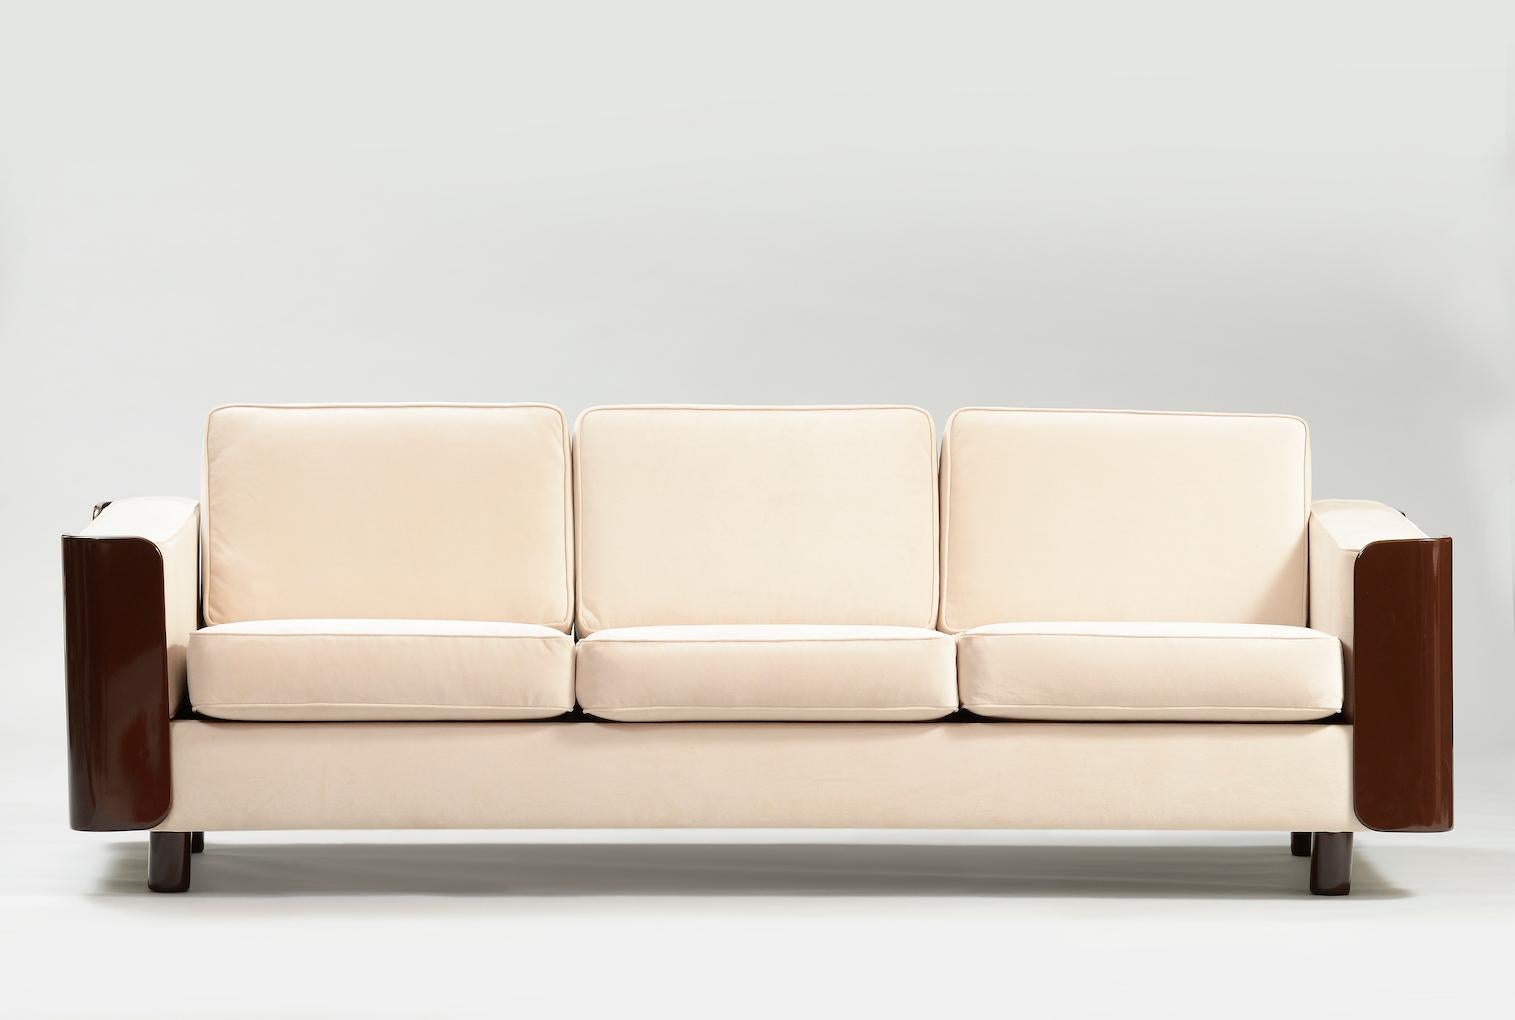 Brown lacquered three-seat Mid-Century Modern sofa re-upholstered in a ivory color velvety fabric with the matching armchairs.
The pair can be sold separately.
Sofa: H. 70 cm (back), D. 82 cm, W. 202 cm
Armchair: H. 70 cm (back), D. 82 cm, W. 88